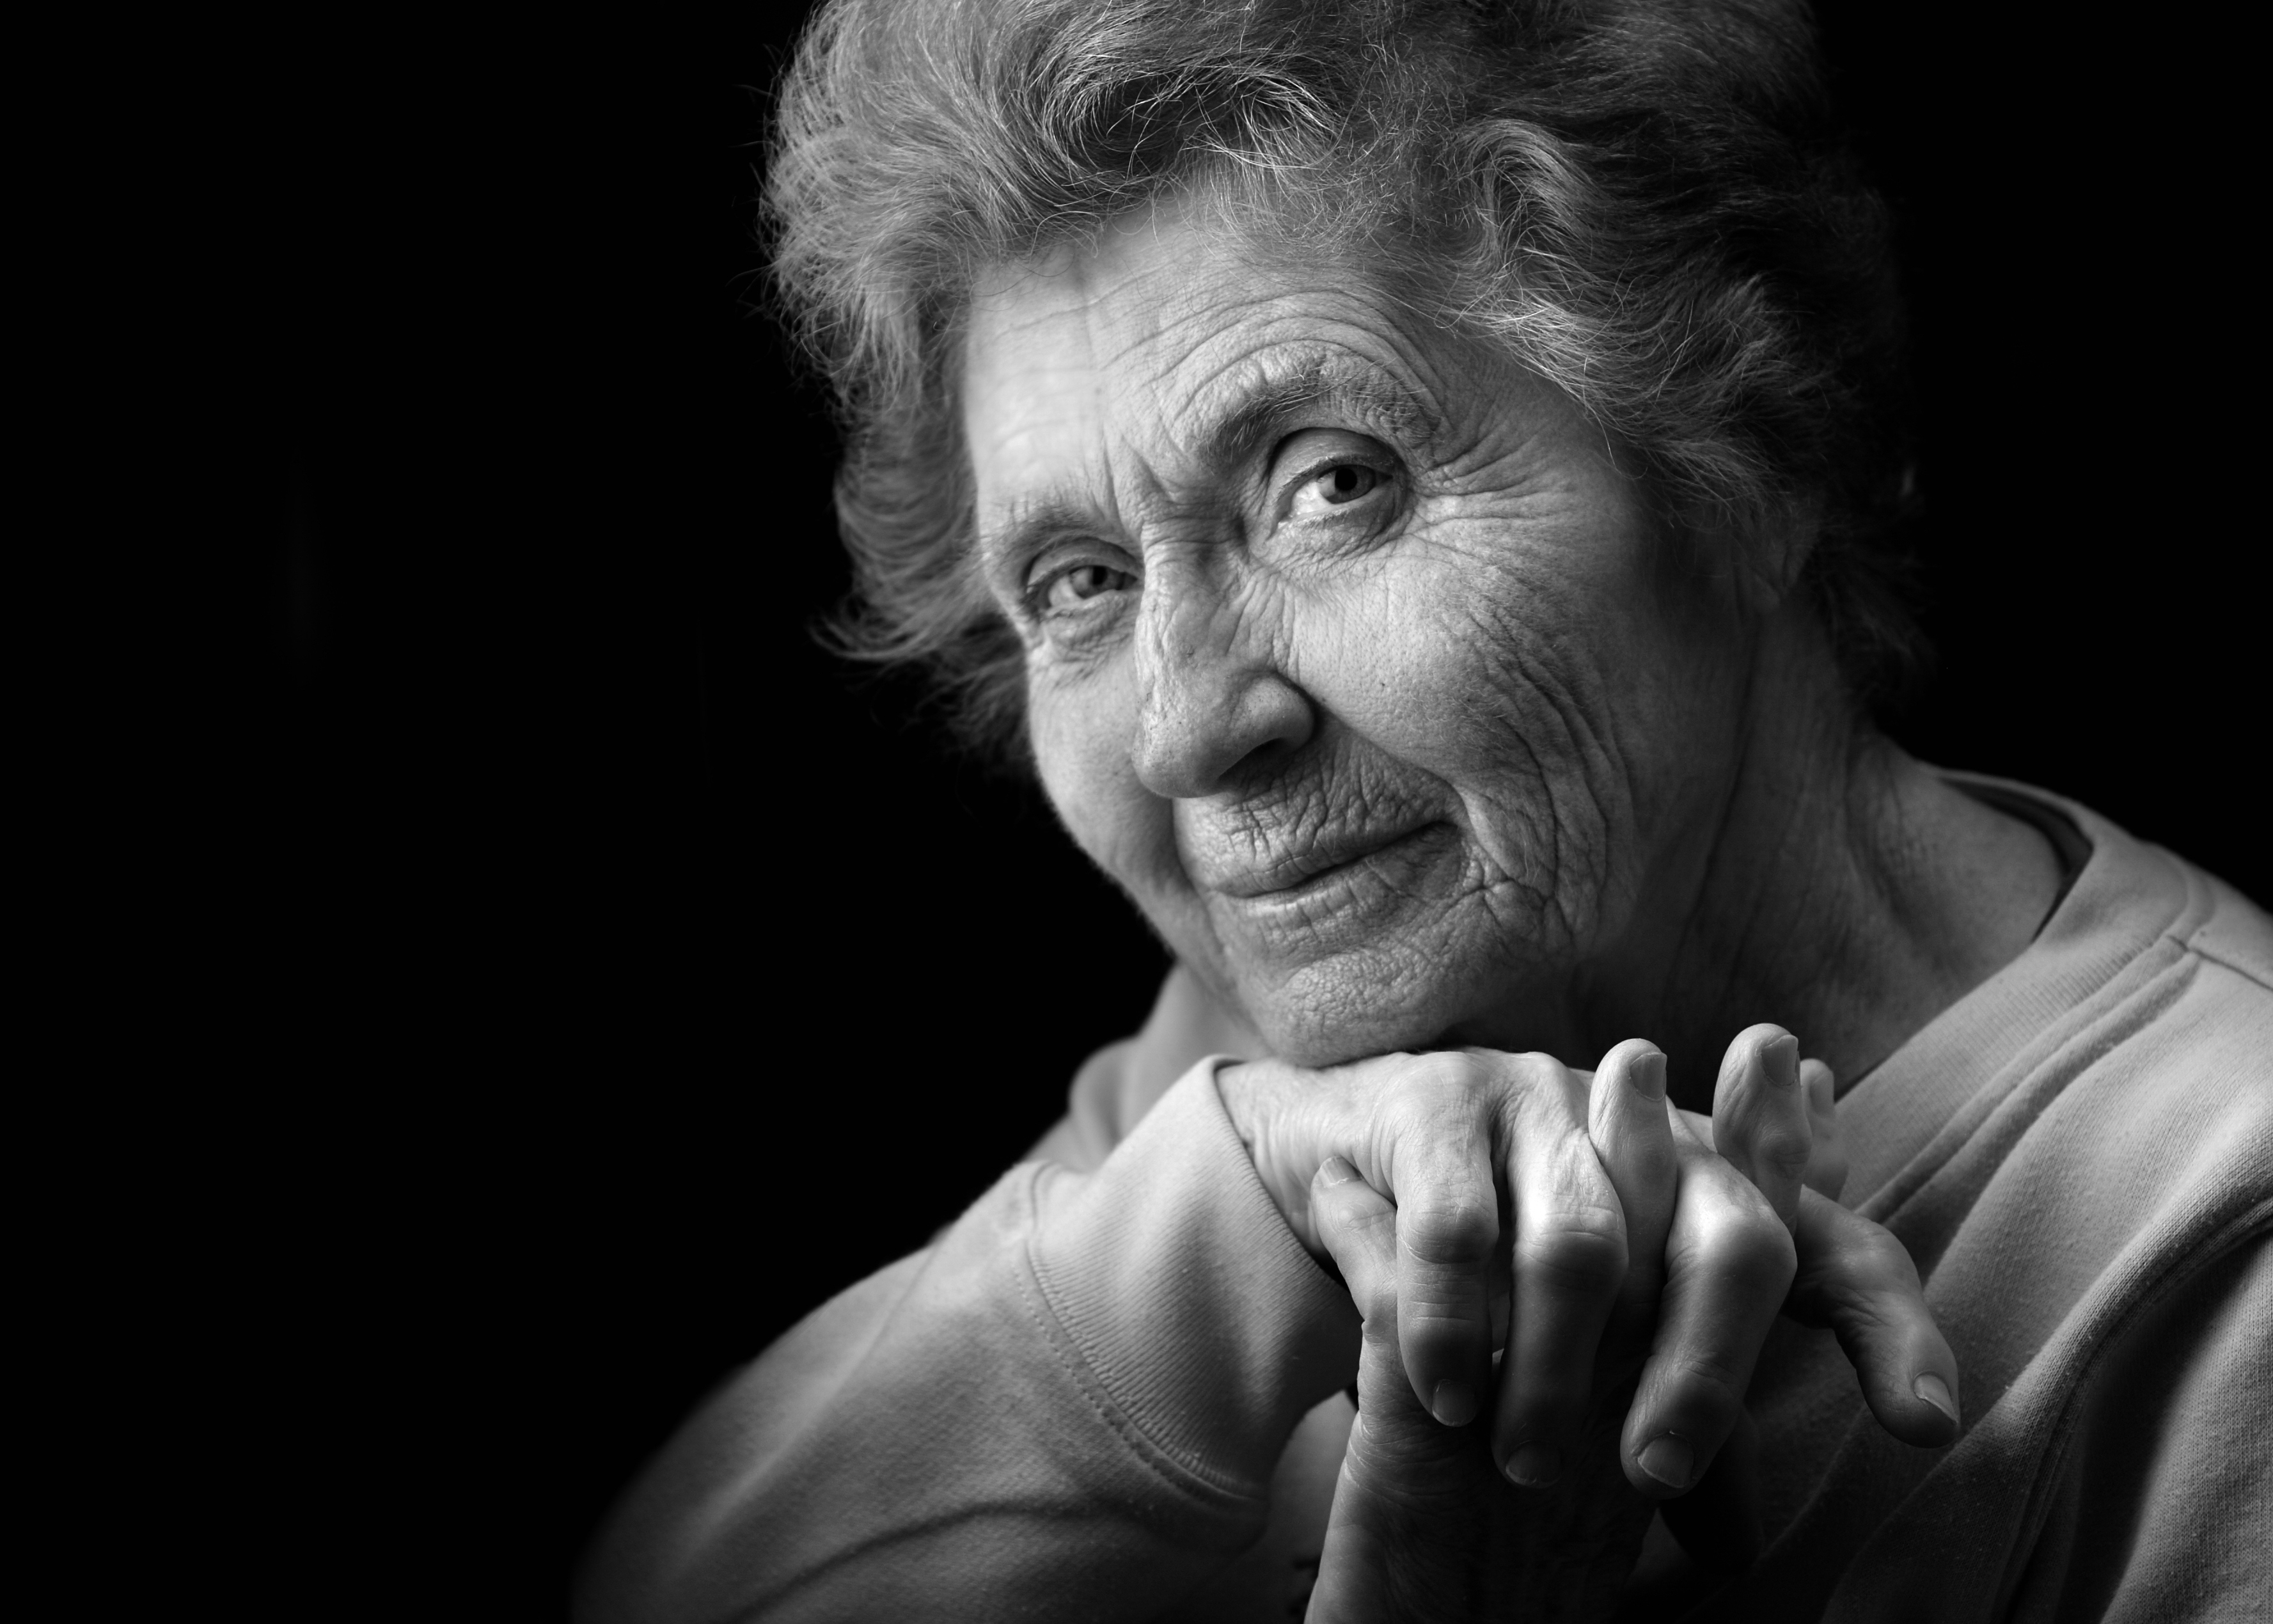 An elderly woman posing for the camera | Source: Shutterstock